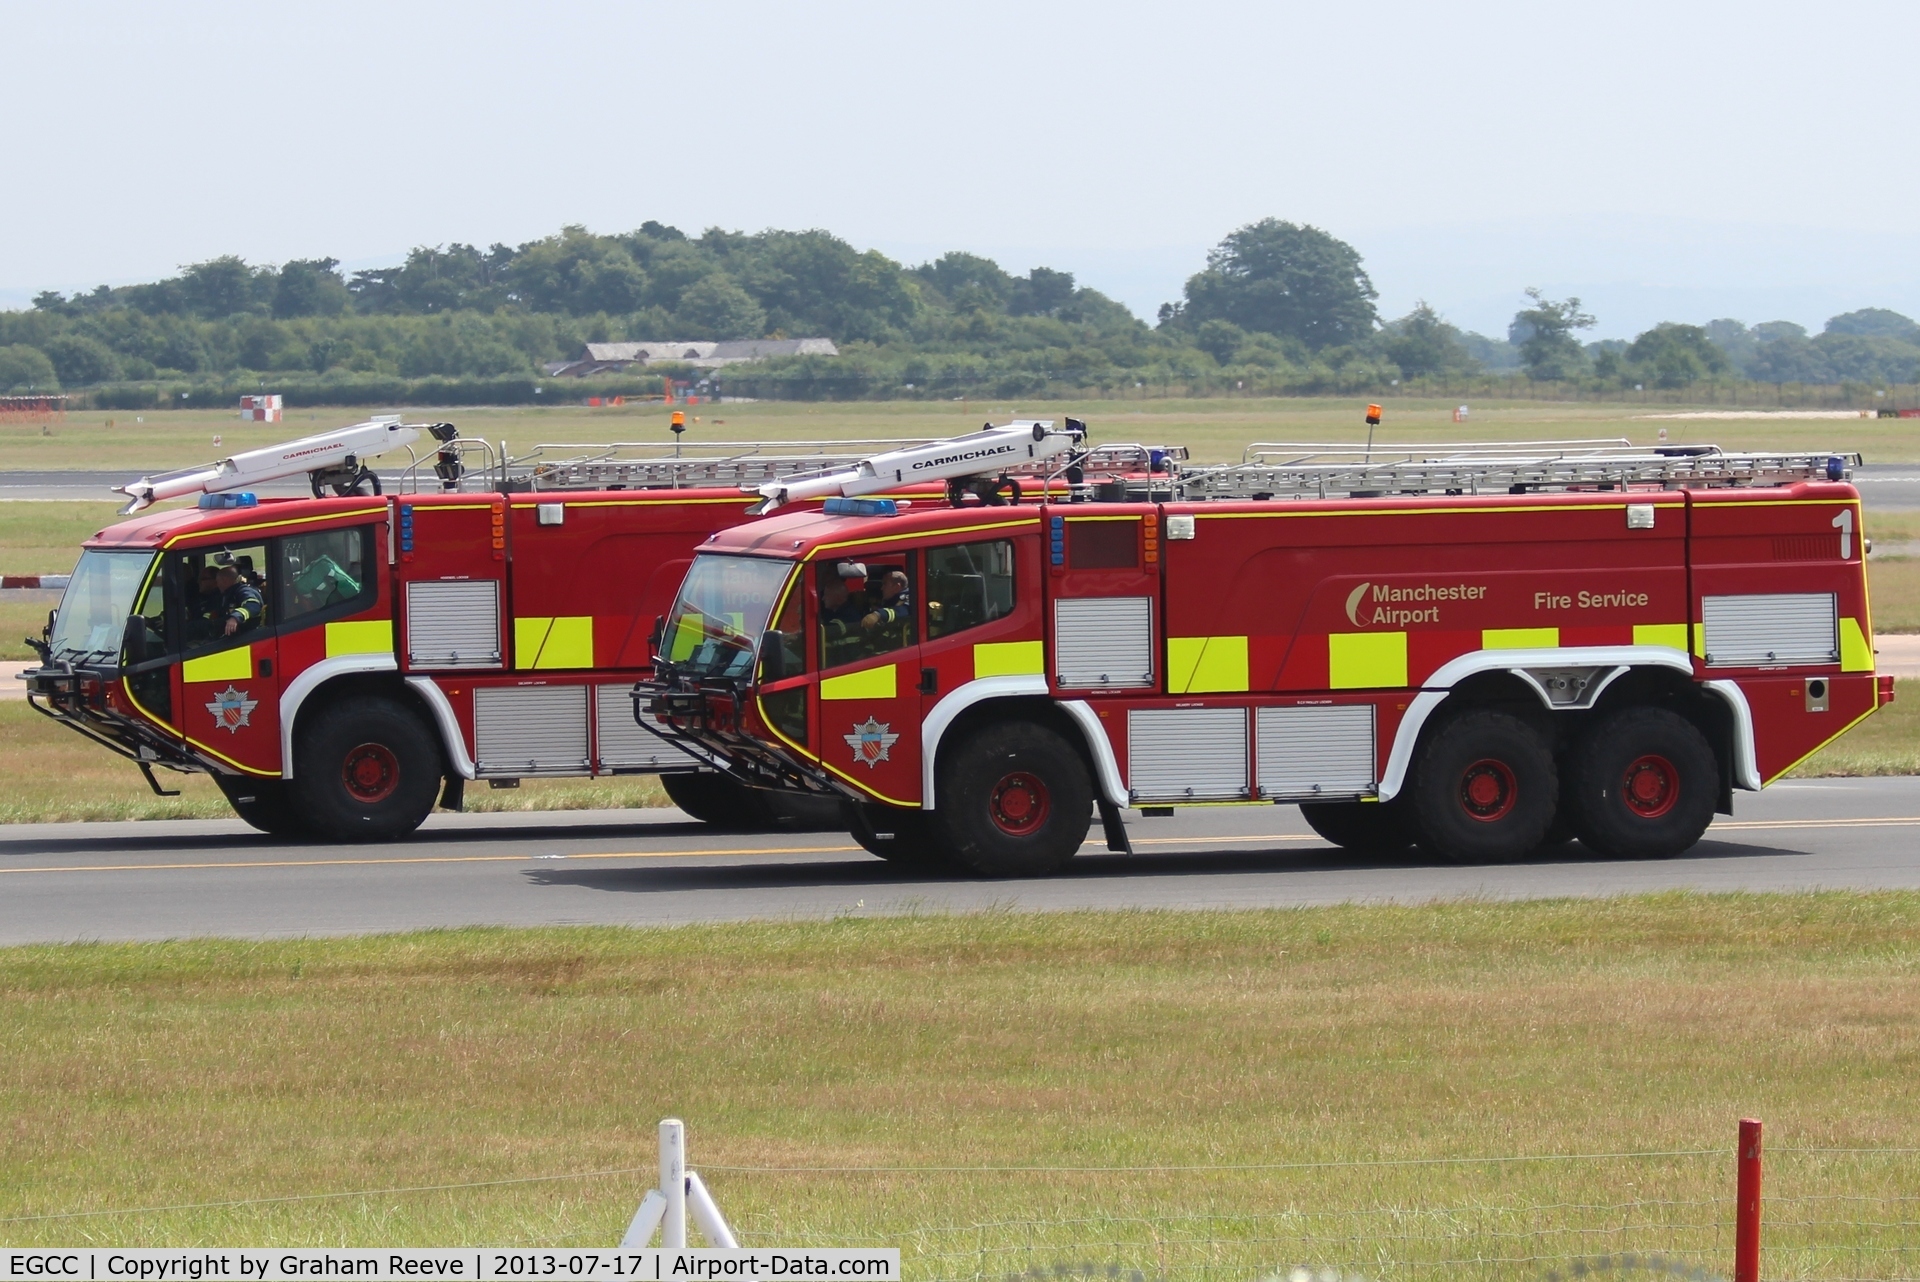 Manchester Airport, Manchester, England United Kingdom (EGCC) - Two of Manchester Airport's fire engines. 